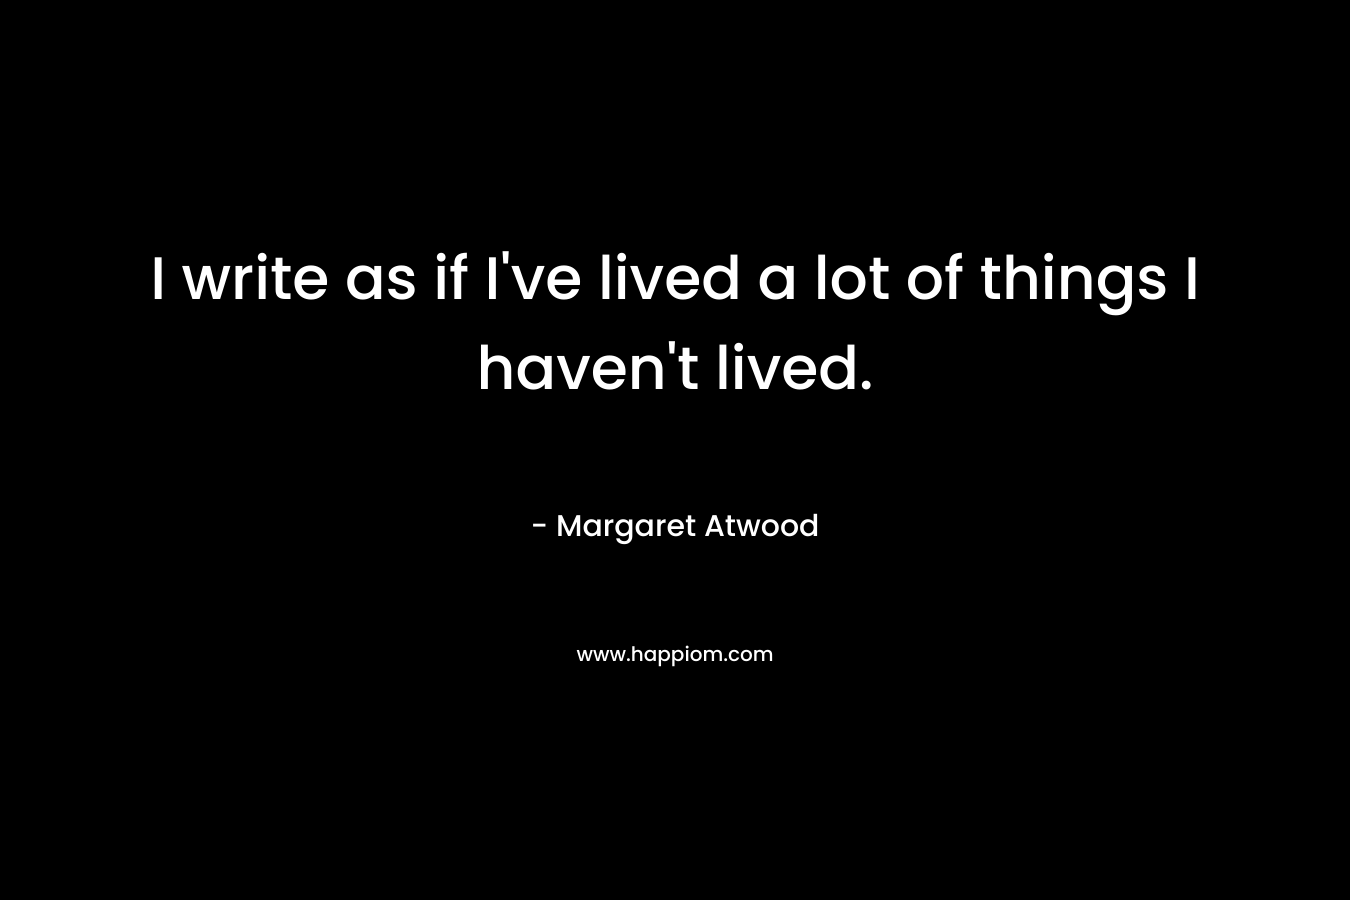 I write as if I’ve lived a lot of things I haven’t lived. – Margaret Atwood